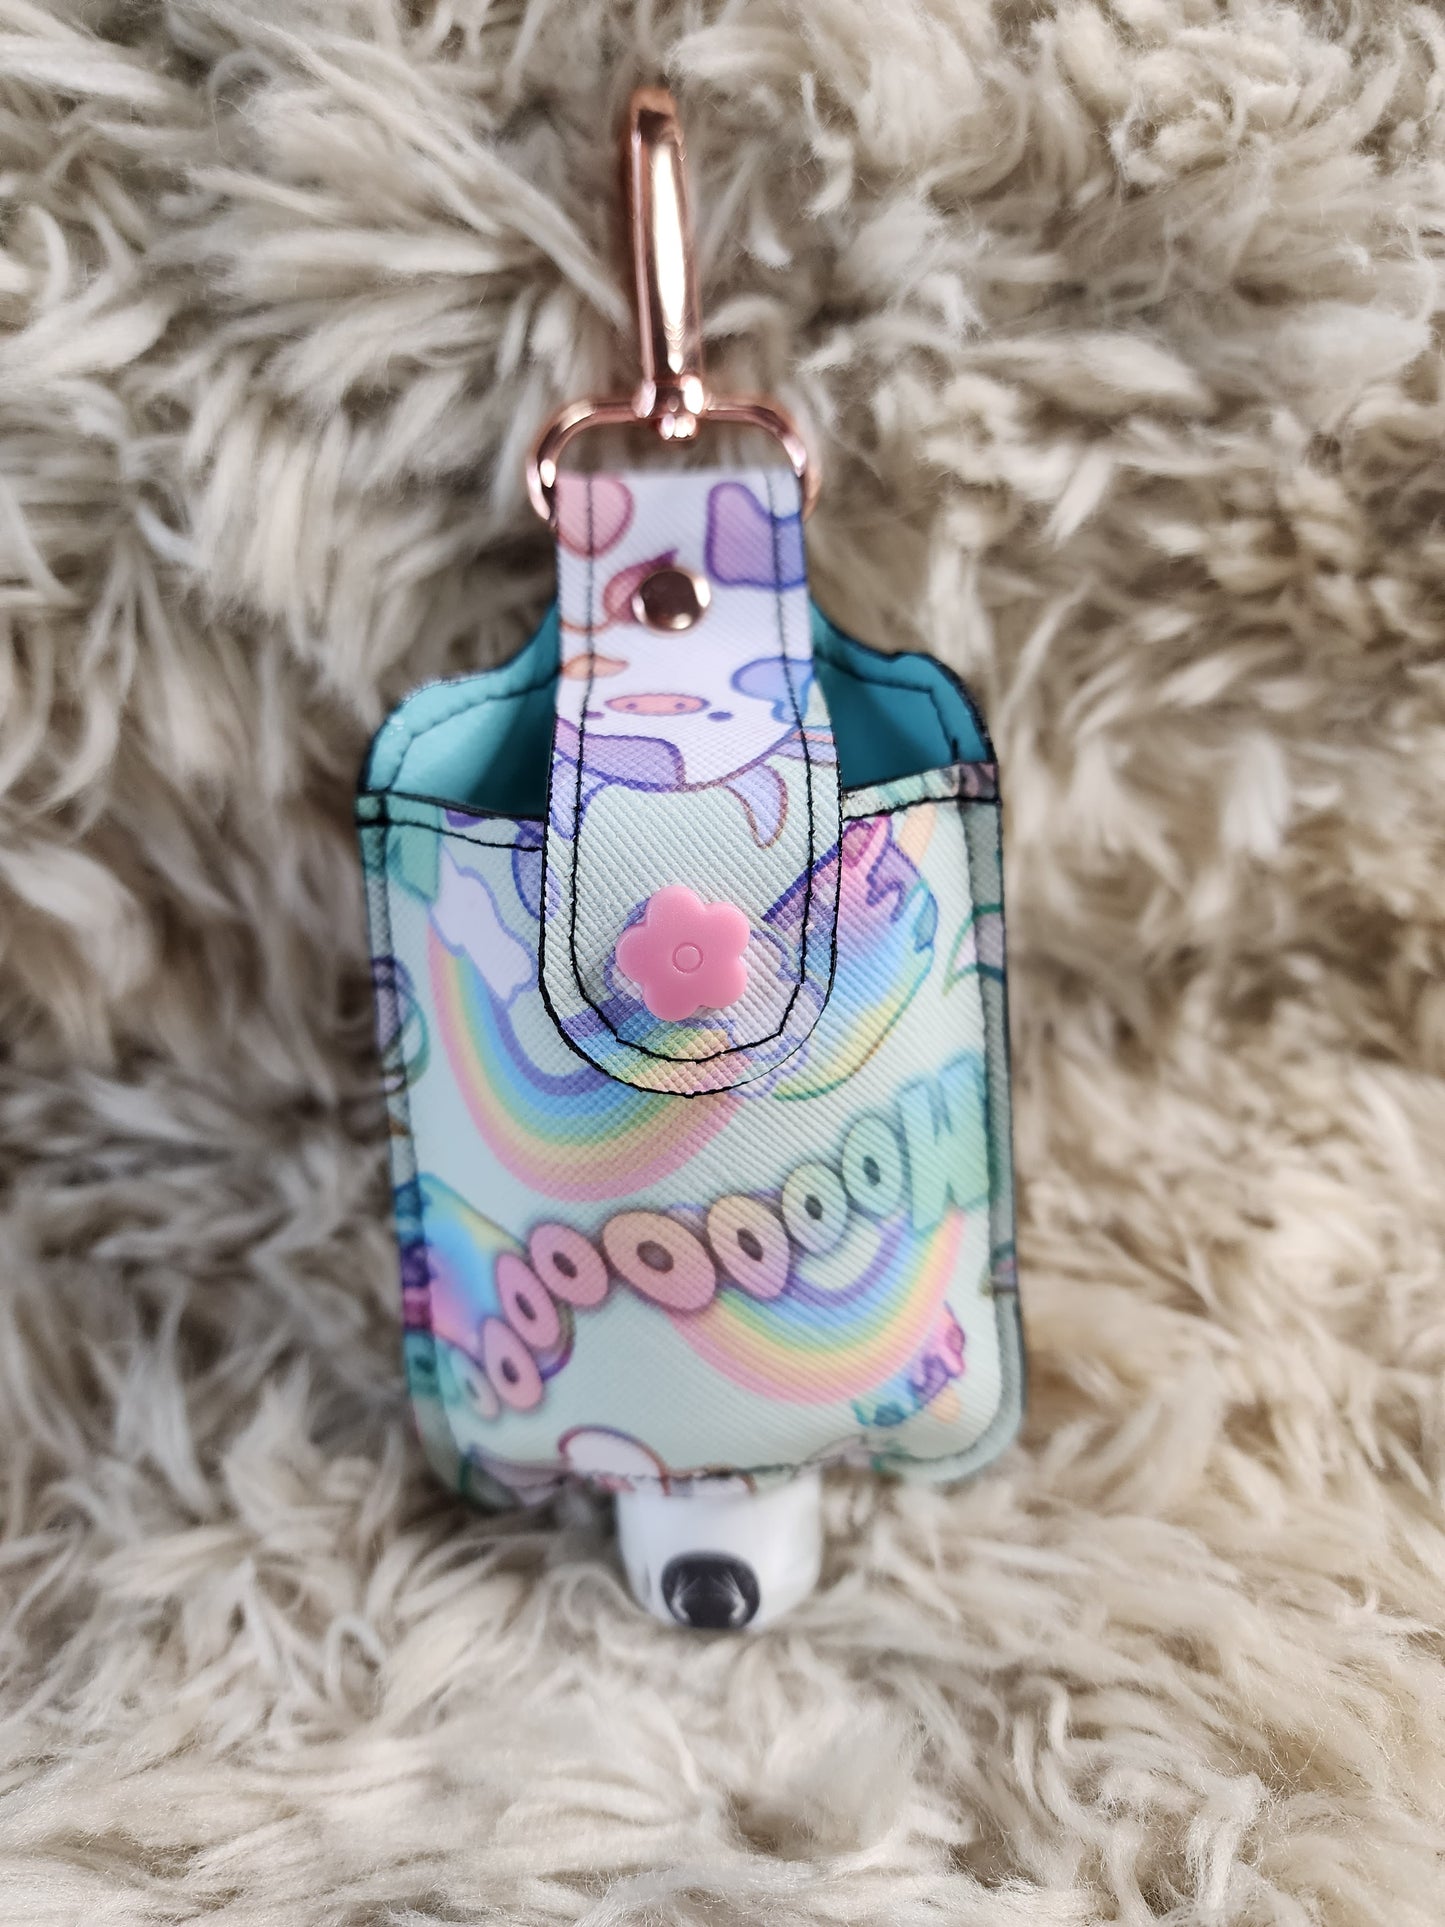 Moo hand sanitizer pouch